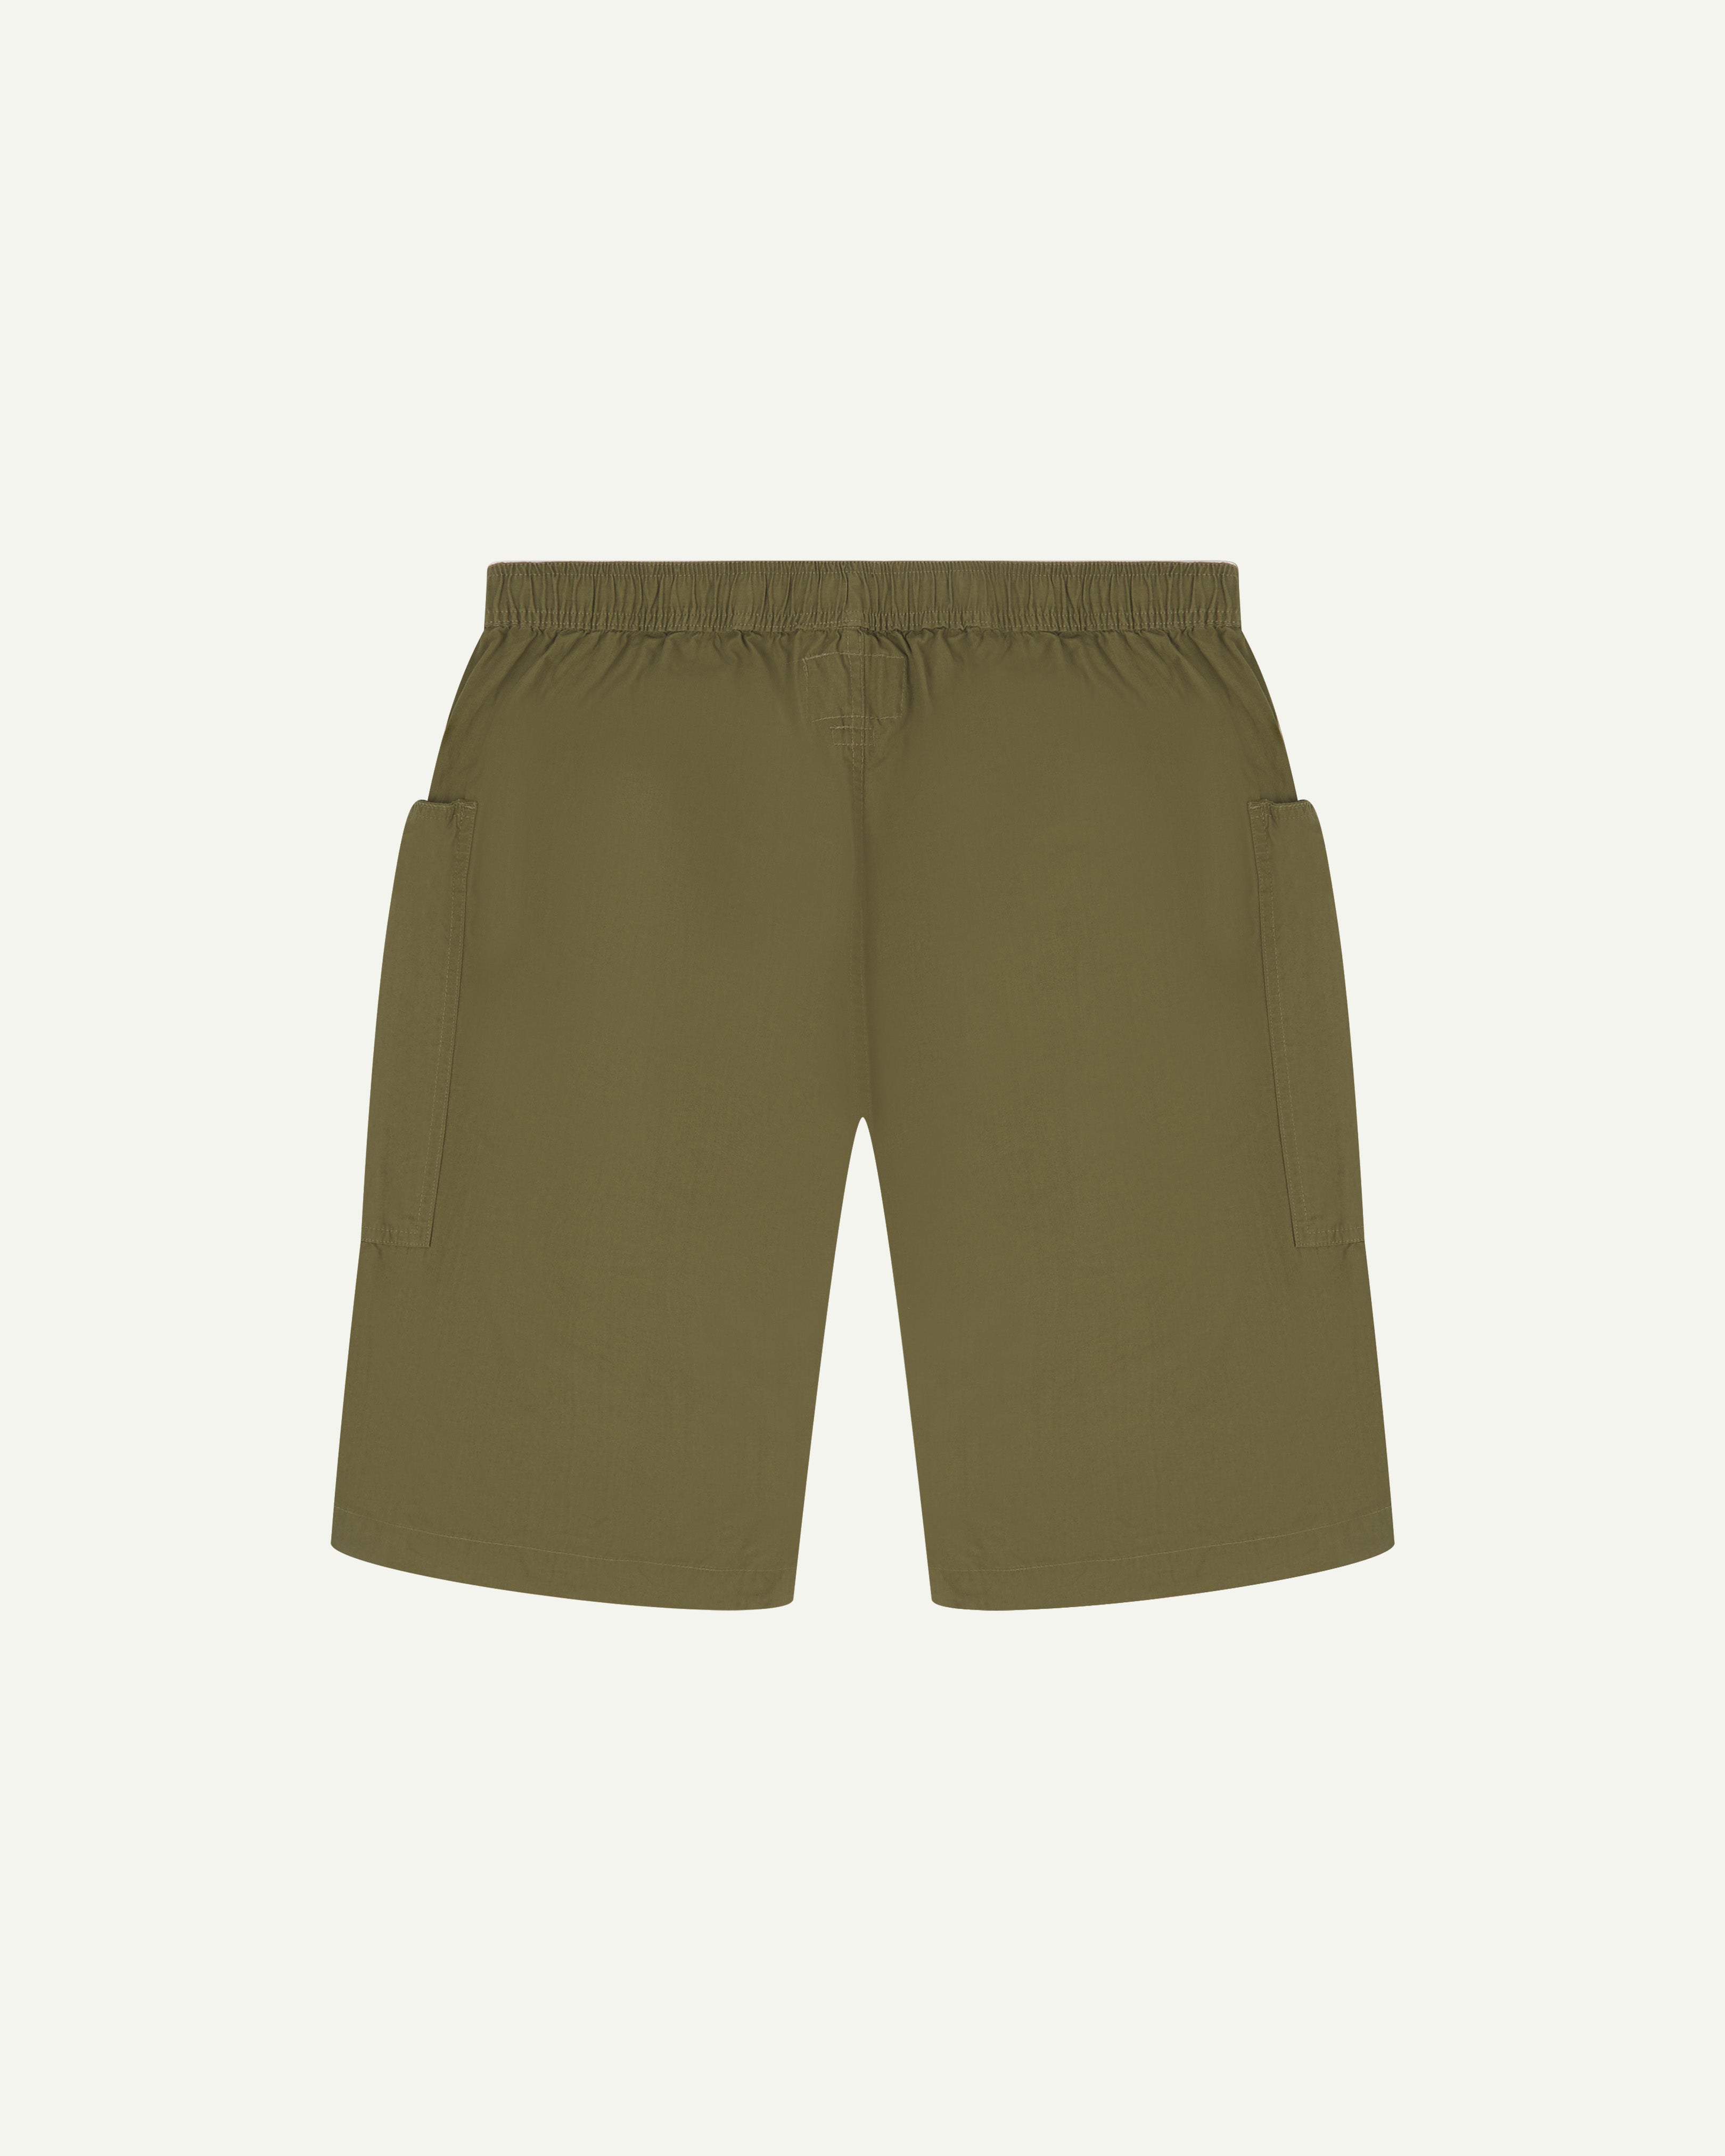 Back view of olive green organic cotton #5015 lightweight cotton shorts by Uskees. Clear view of lightweight elasticated waist .